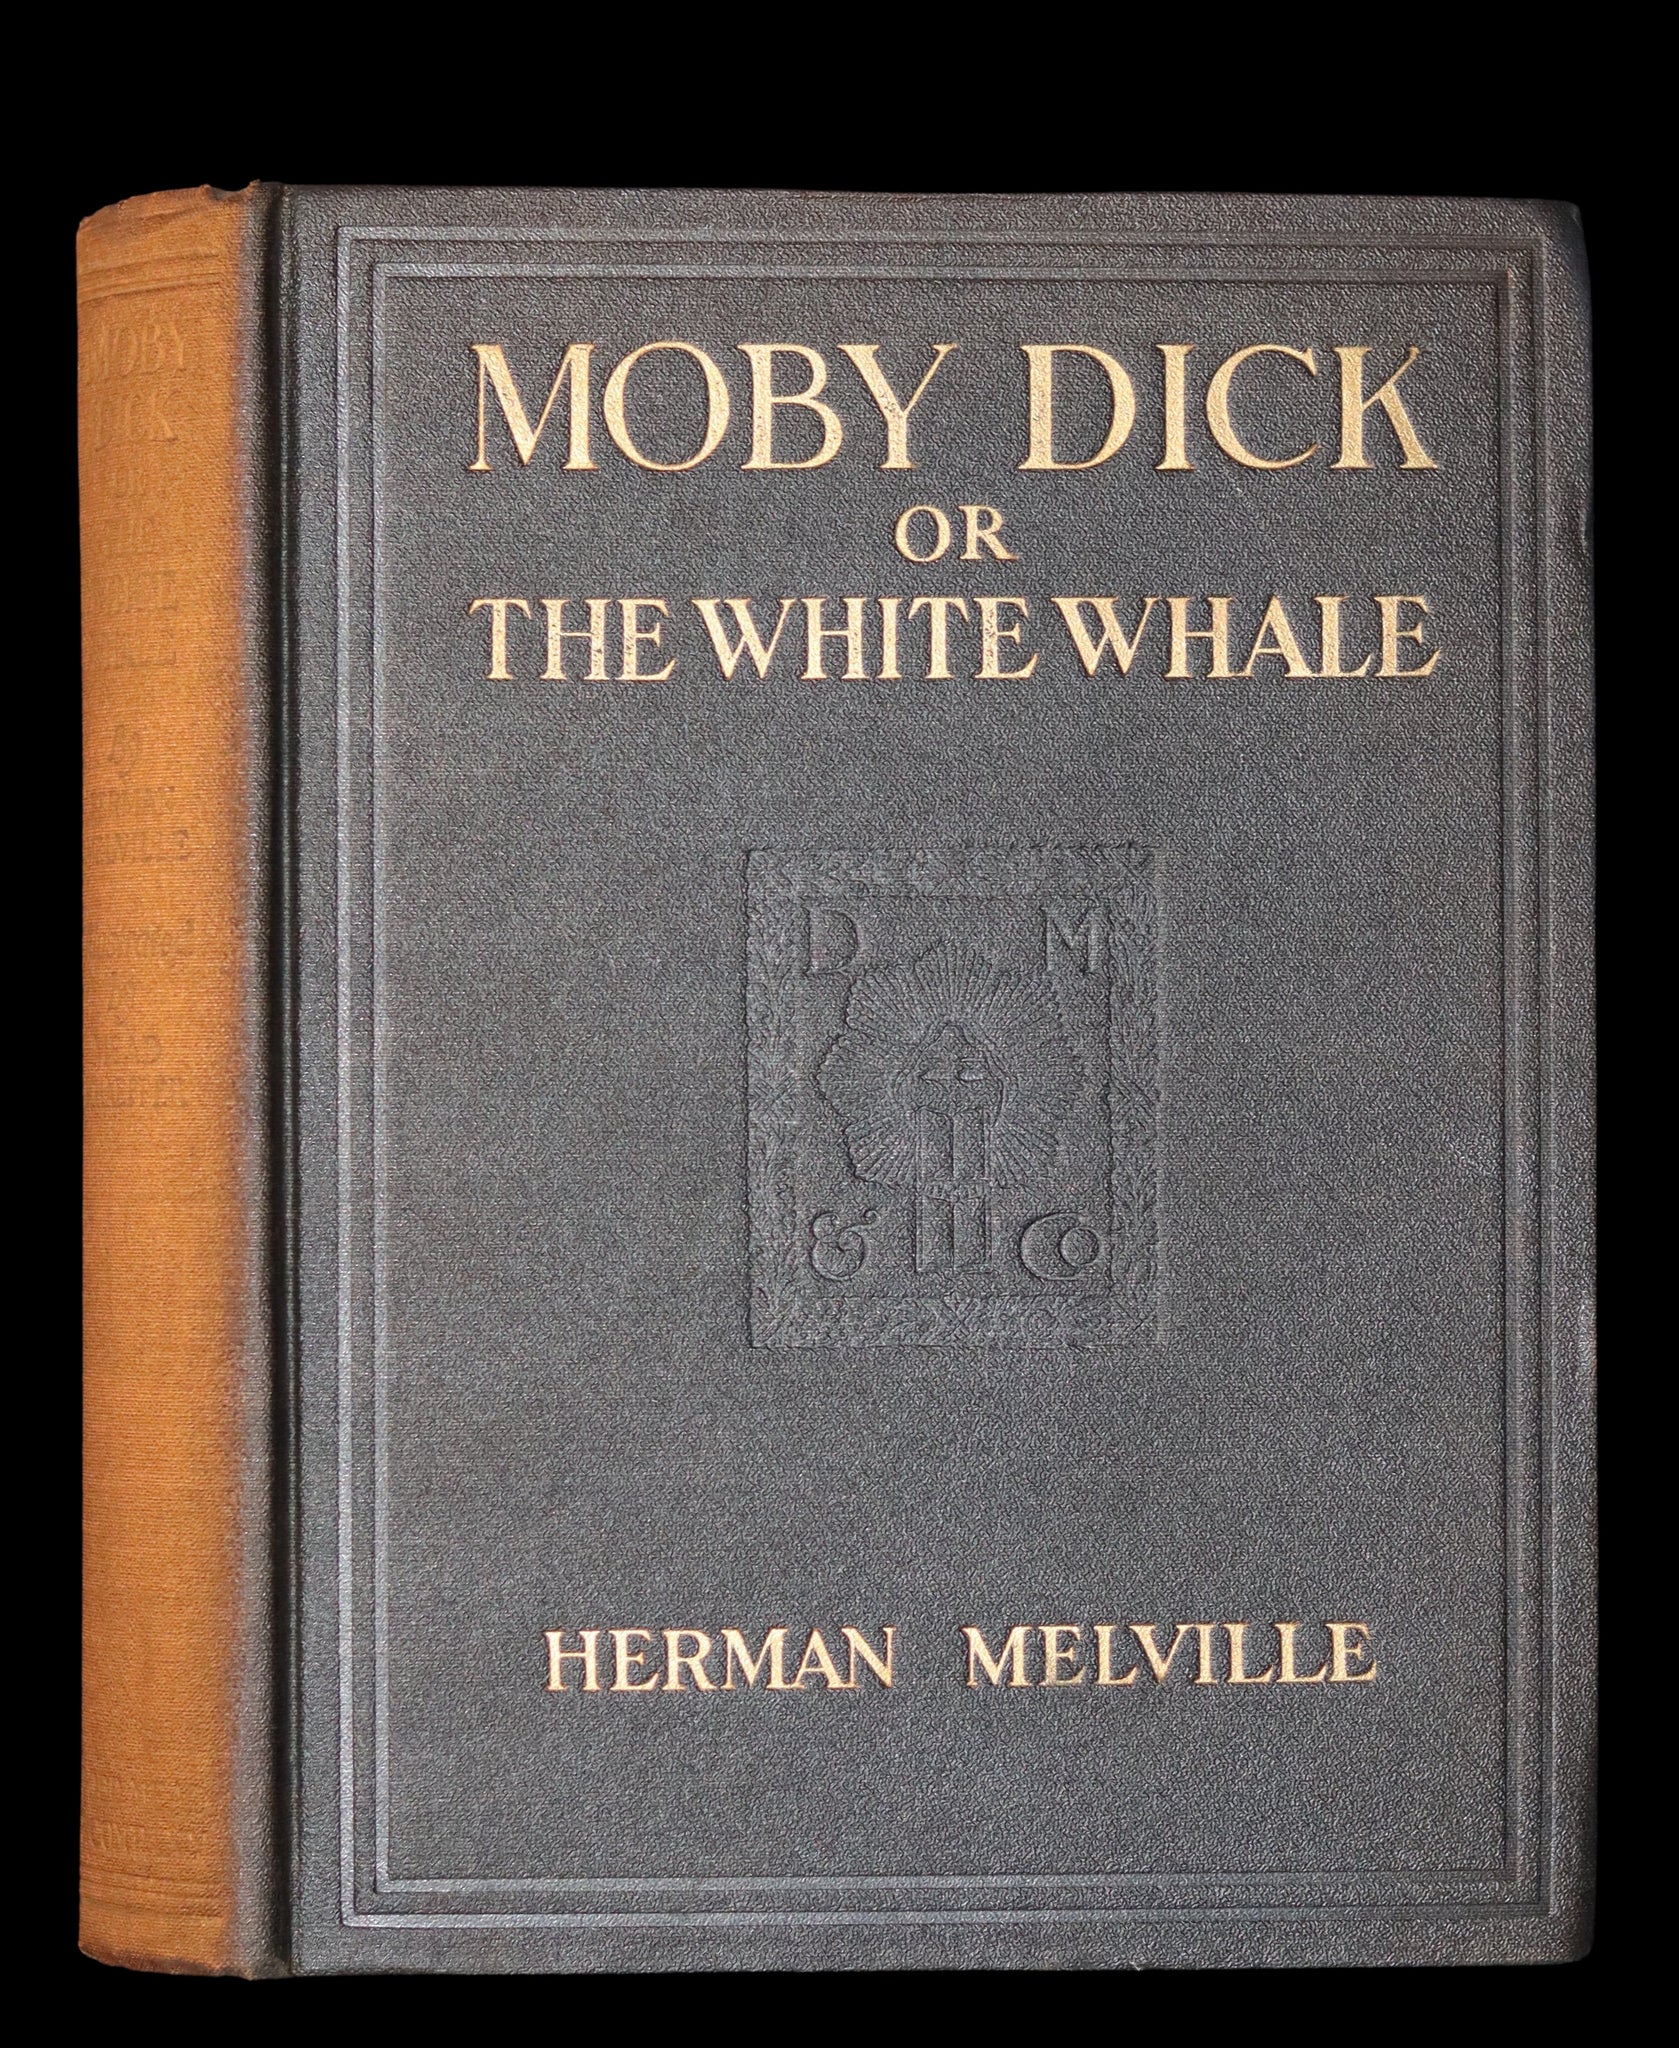 Moby-Dick or, the Whale by Herman Melville